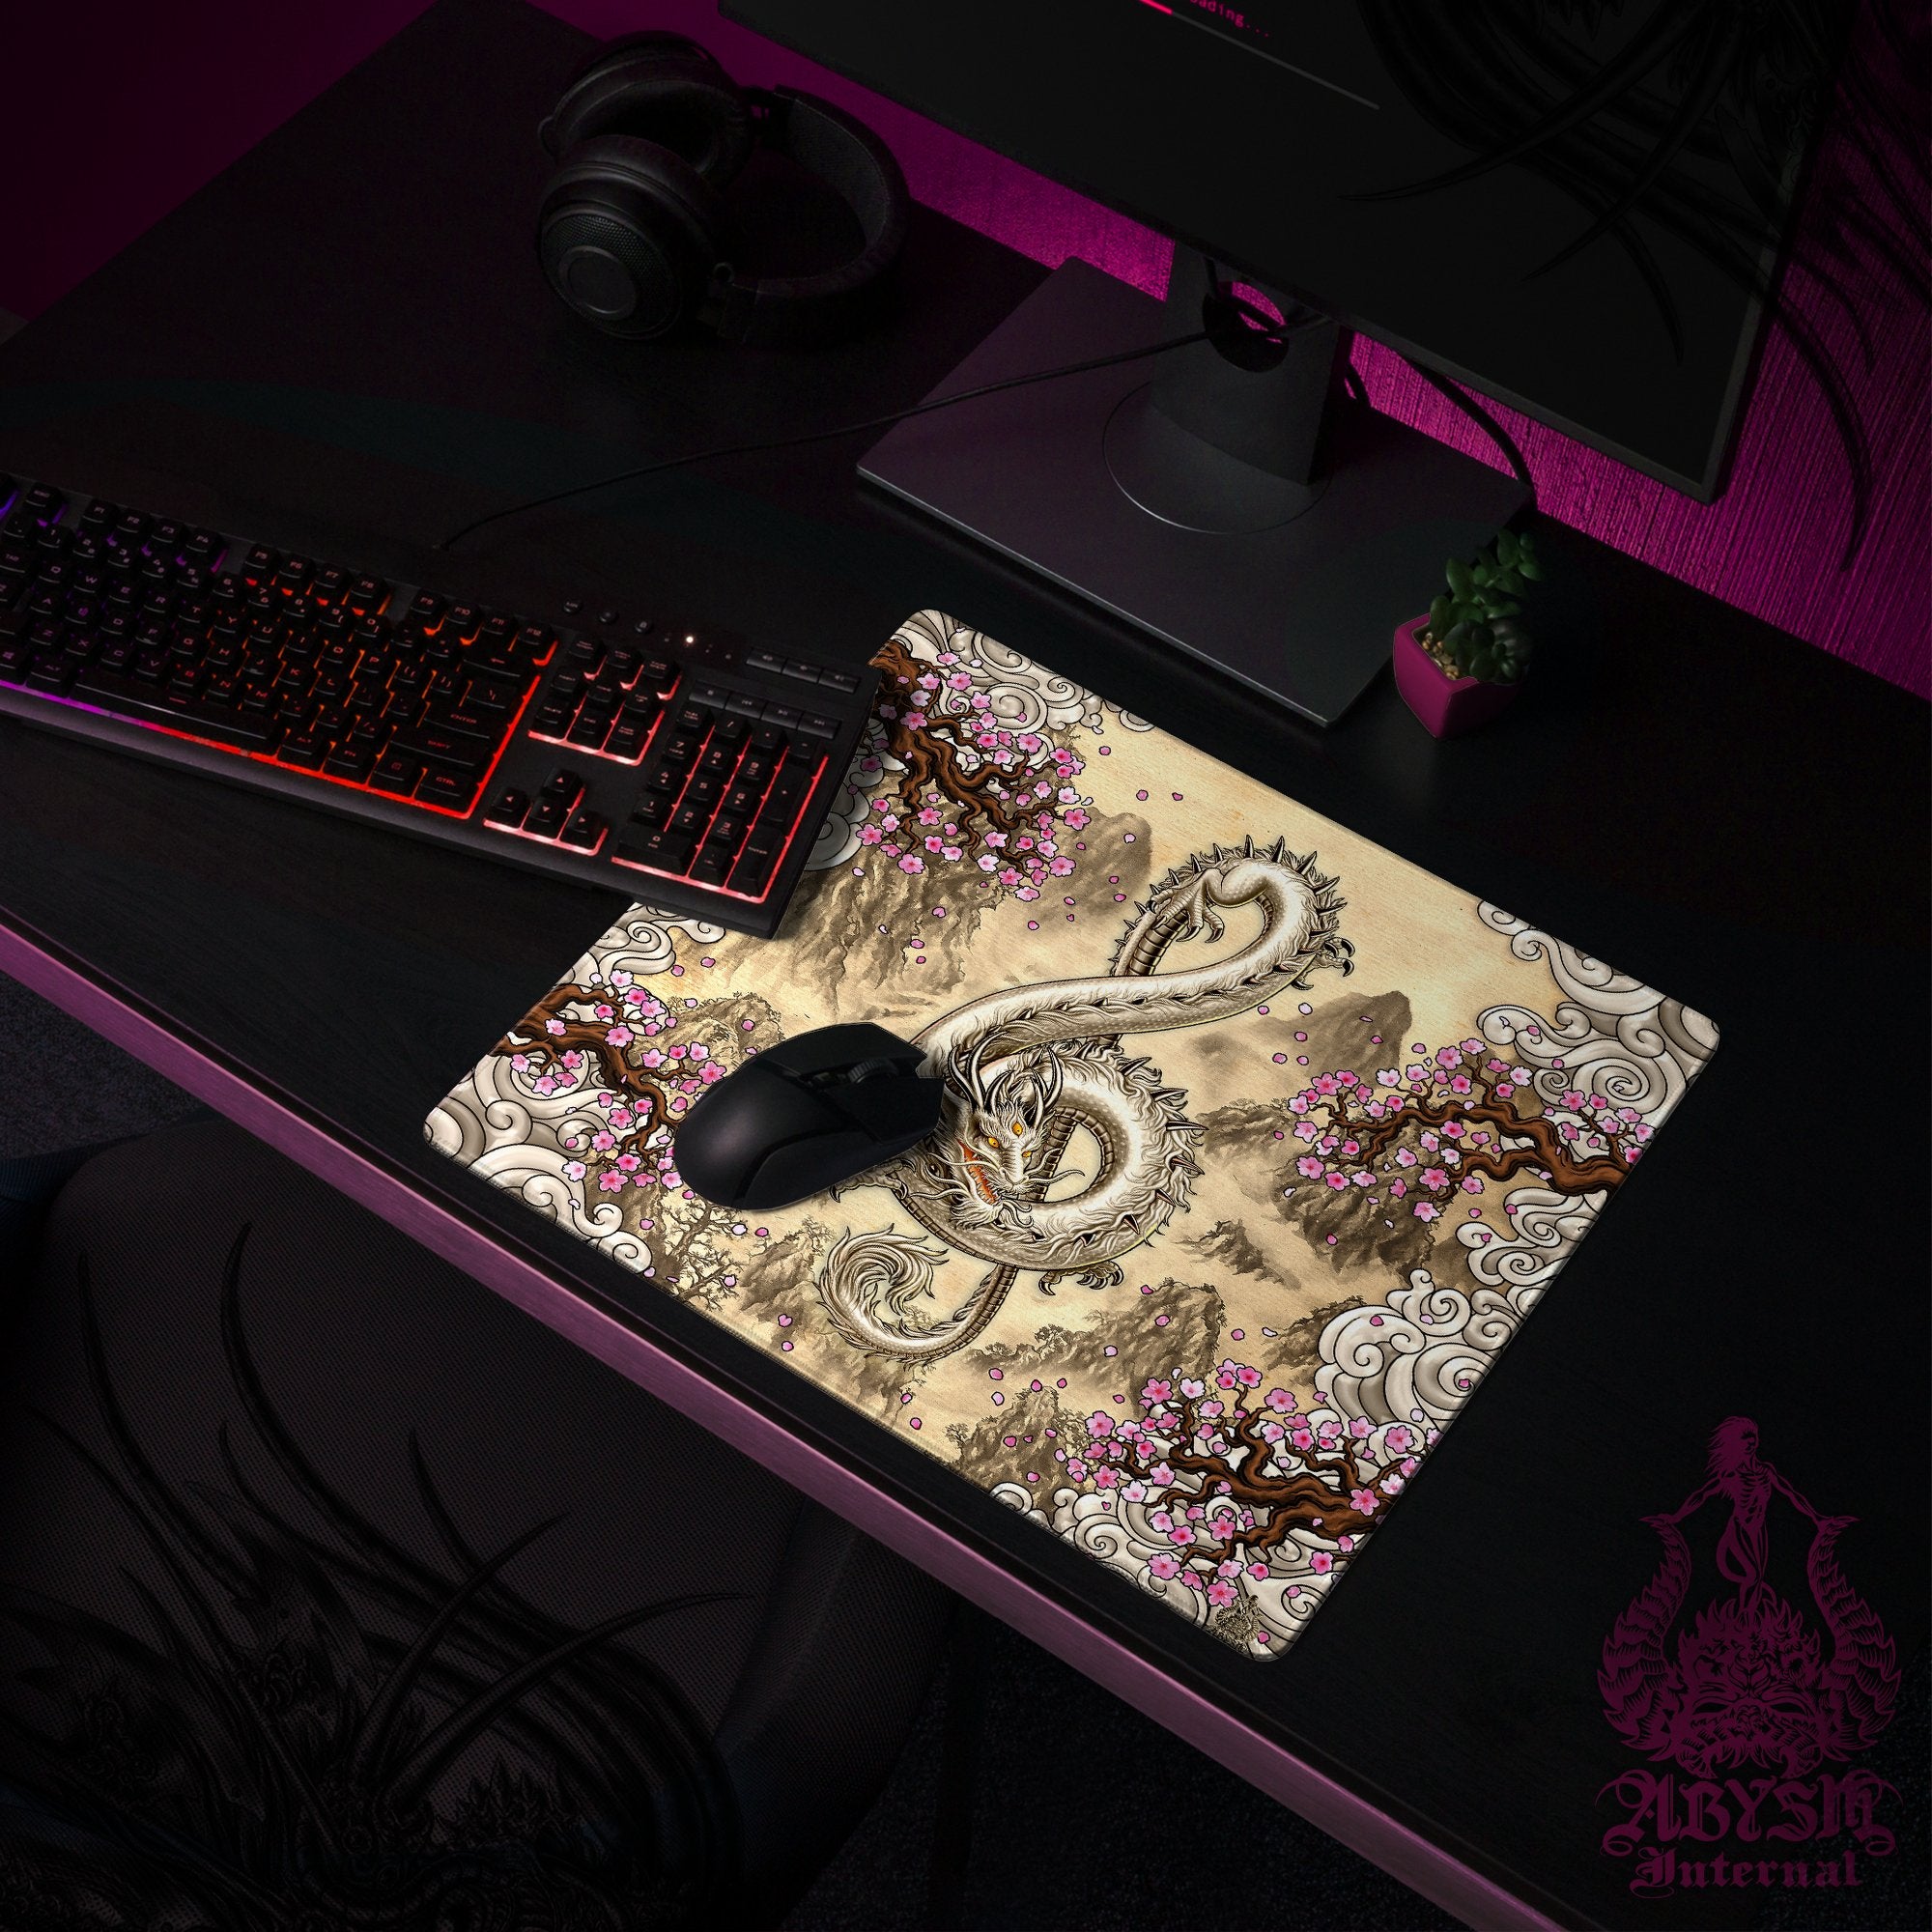 Chinese Dragon Mouse Pad, Music Gaming Desk Mat, Cherry Blossom Workpad, Asian Painting Table Protector Cover, Treble Clef Art Print - Abysm Internal